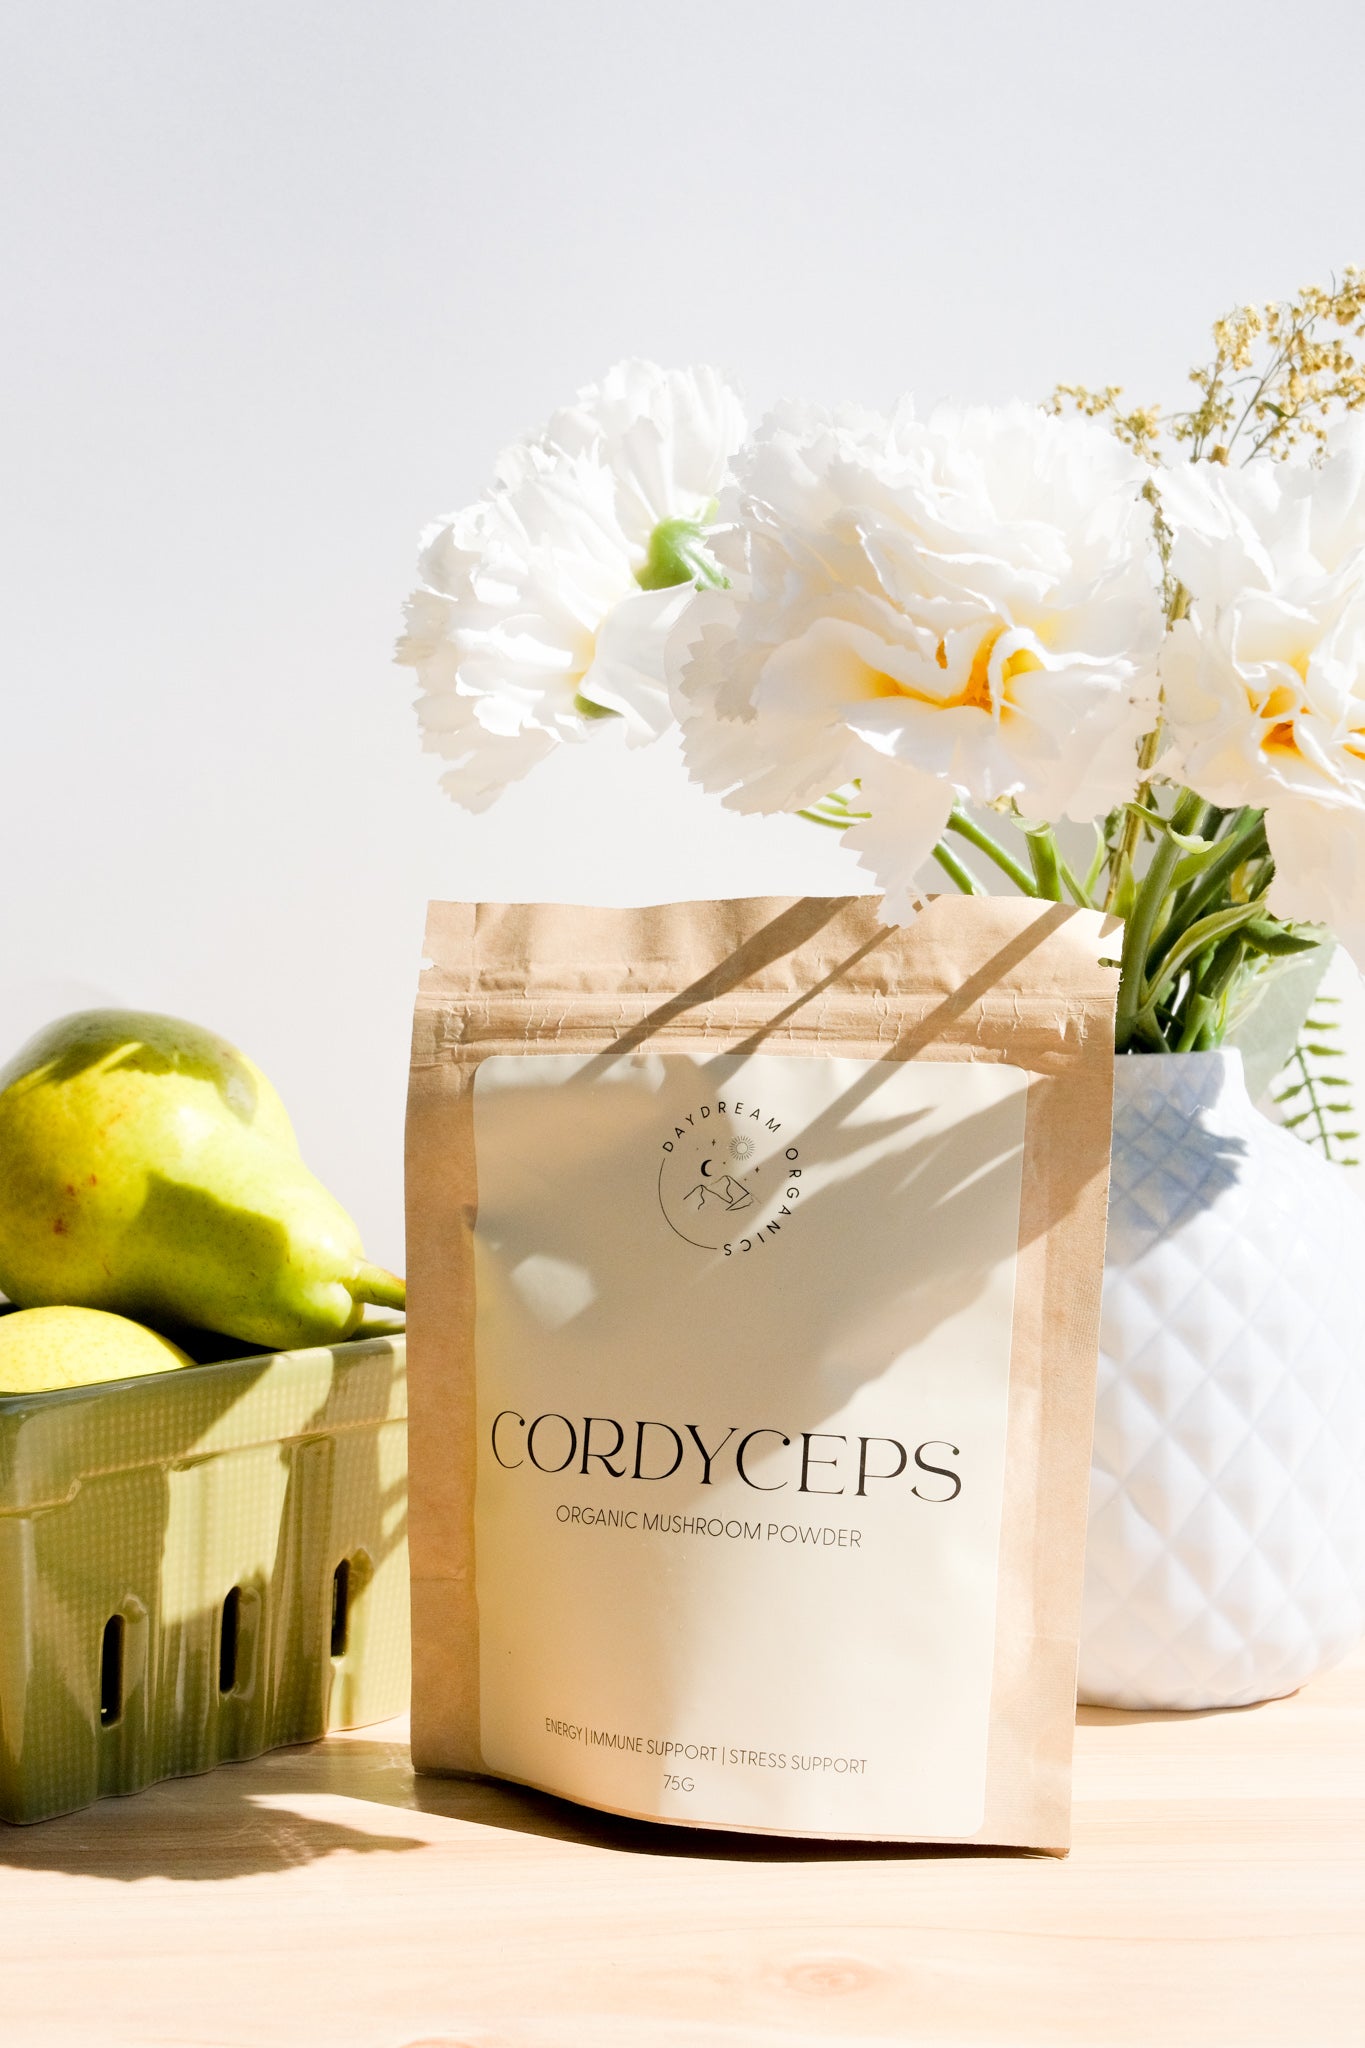 Our organic Cordyceps mushroom powder is an adaptogenic mushroom powder that can be used to stabilize energy and stress levels as well as enhance stamina, endurance and oxygen uptake.